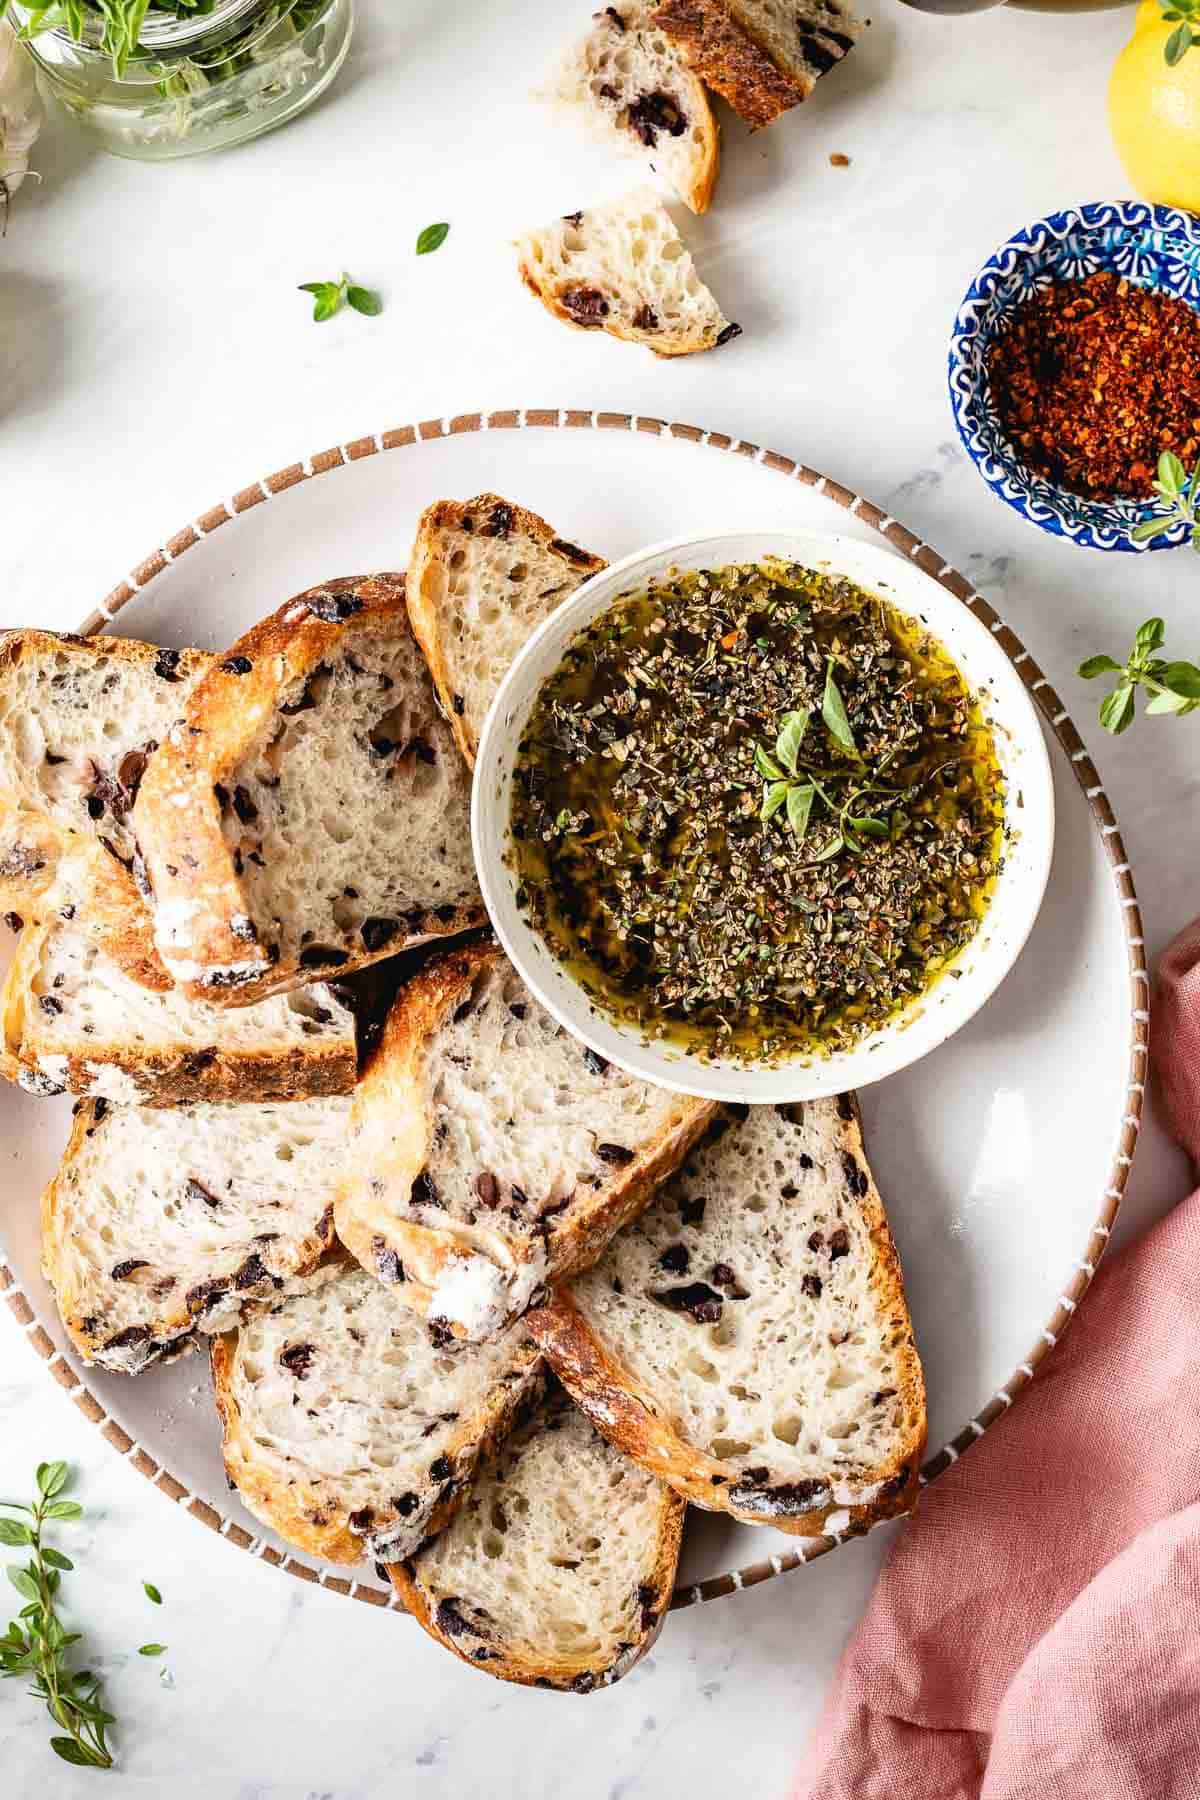 Garlic bread dipping sauce in a bowl with bread on the side.